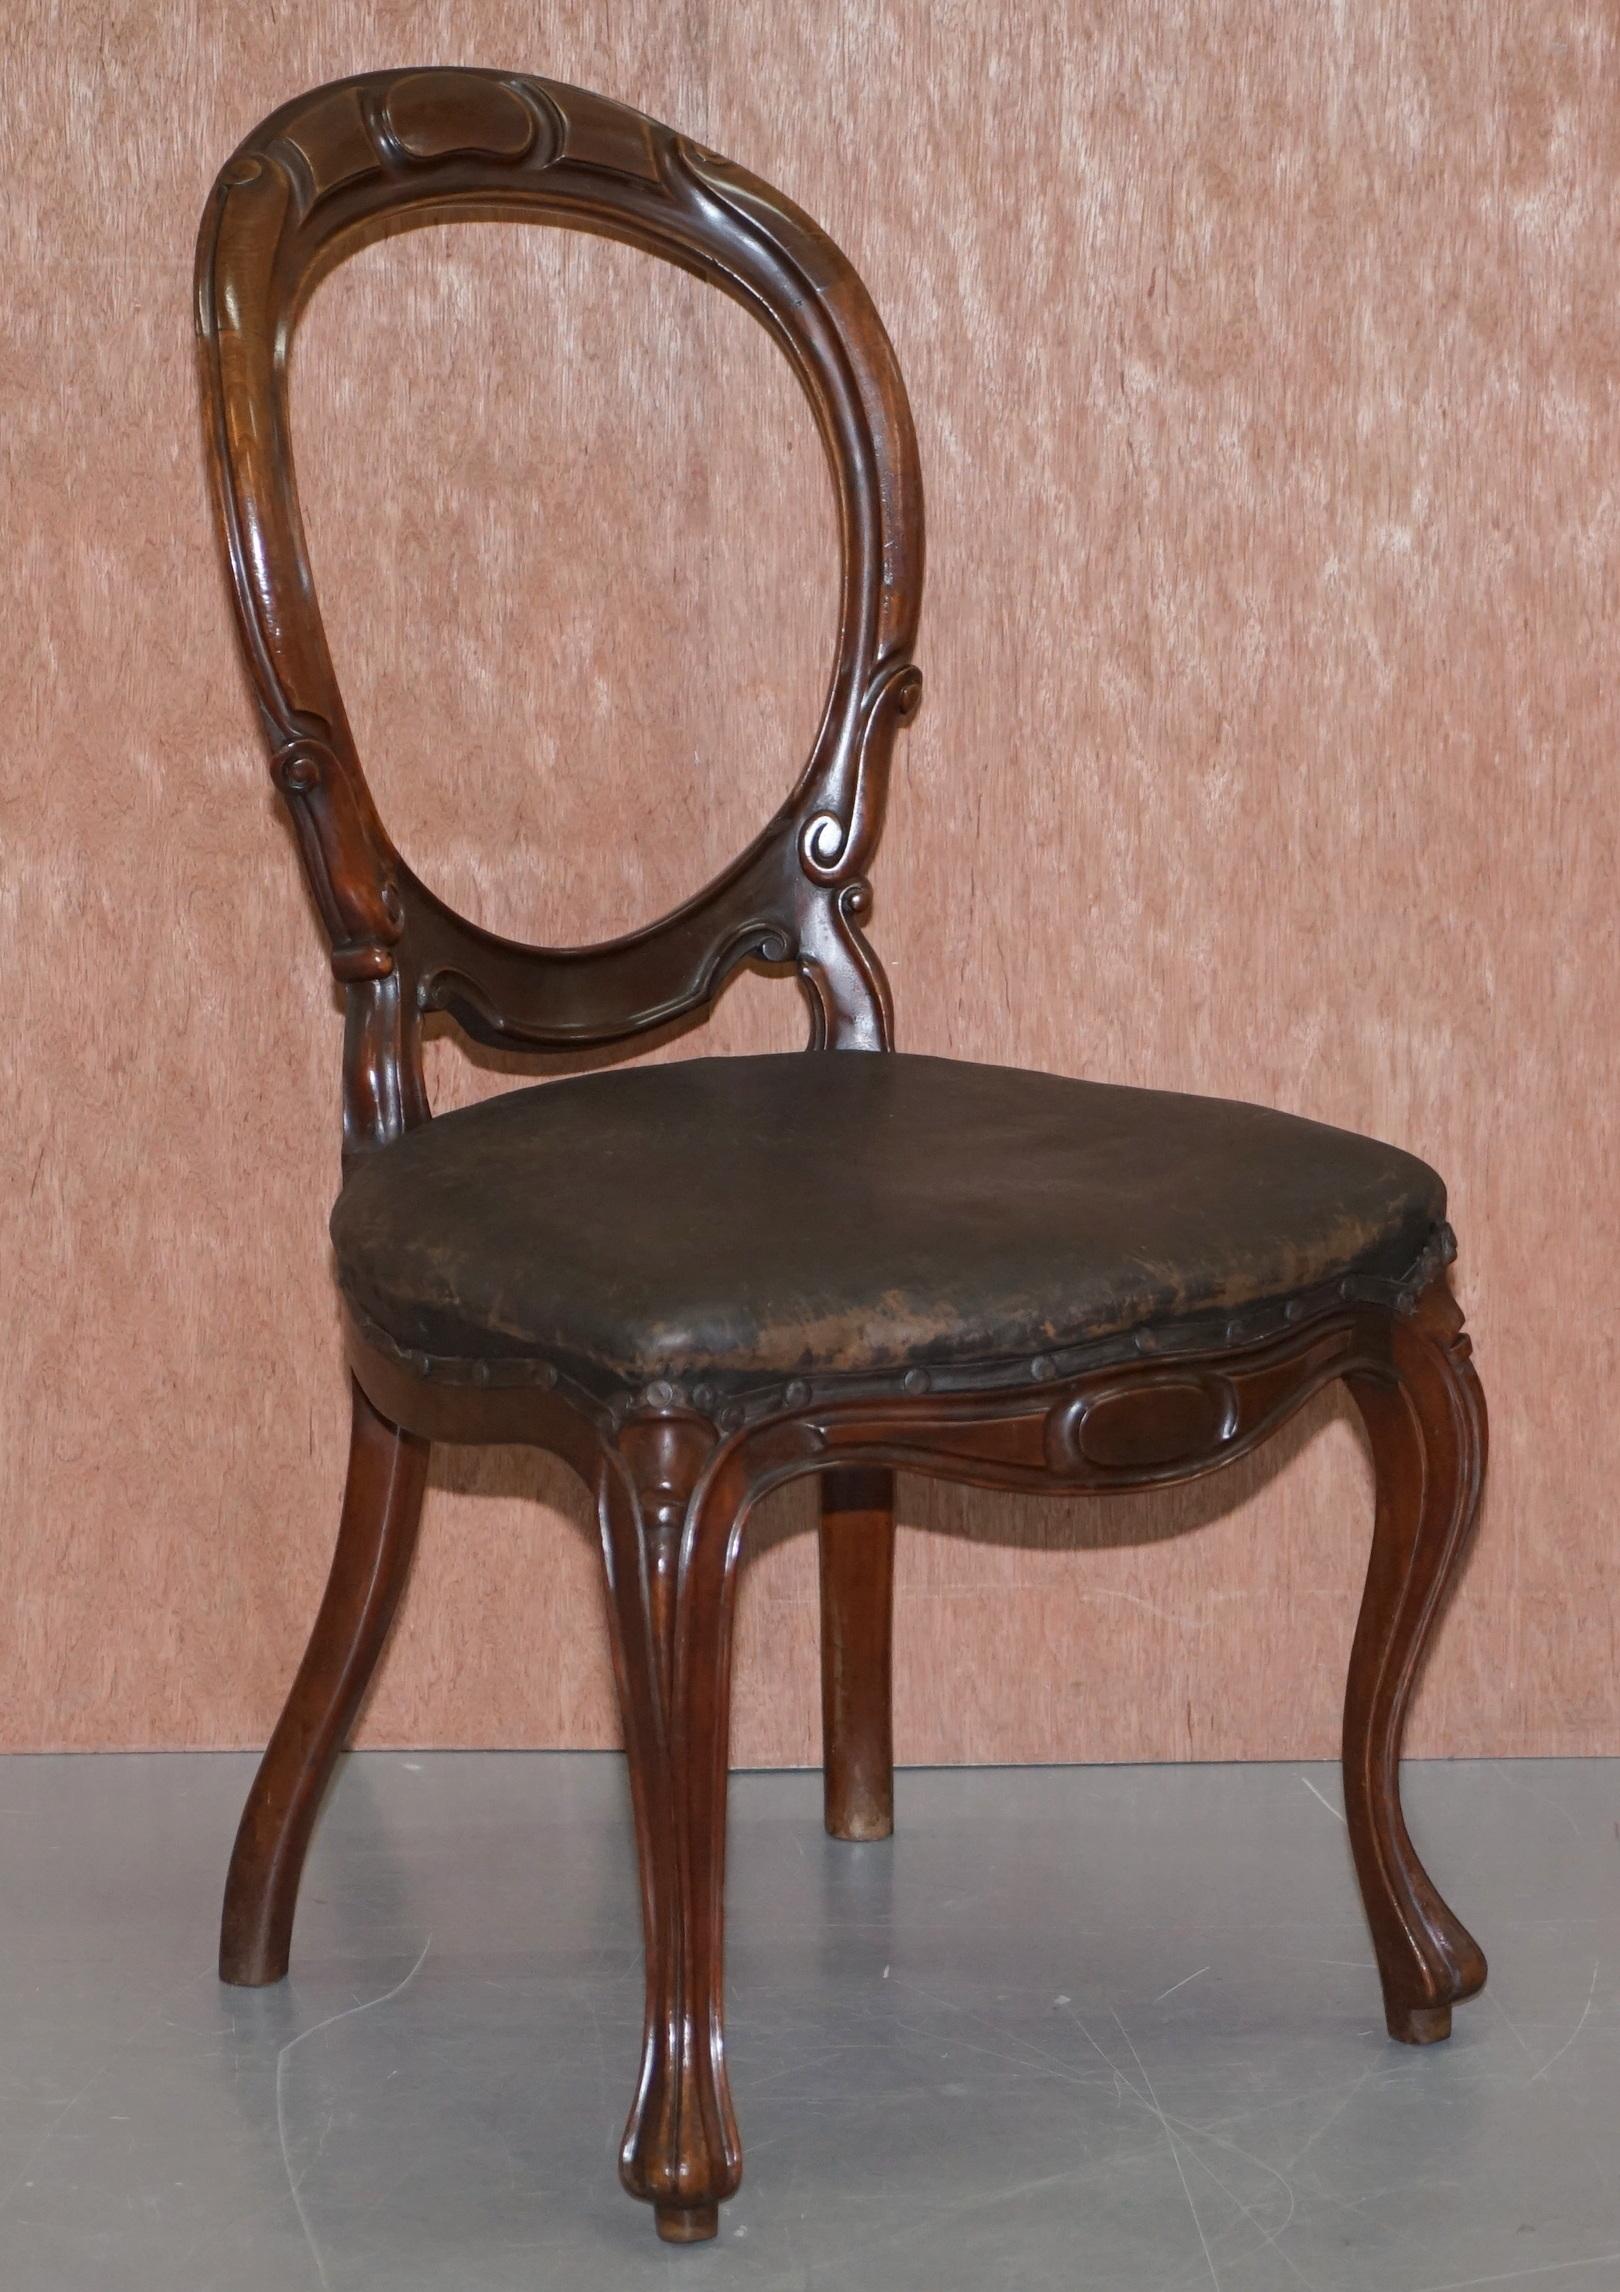 We are delighted to offer for sale this lovely suite six handmade original Victorian spoon or medallion back dining chairs with original upholstery

A good looking well made and decorative suite of mid Victorian dining chairs. The frames are